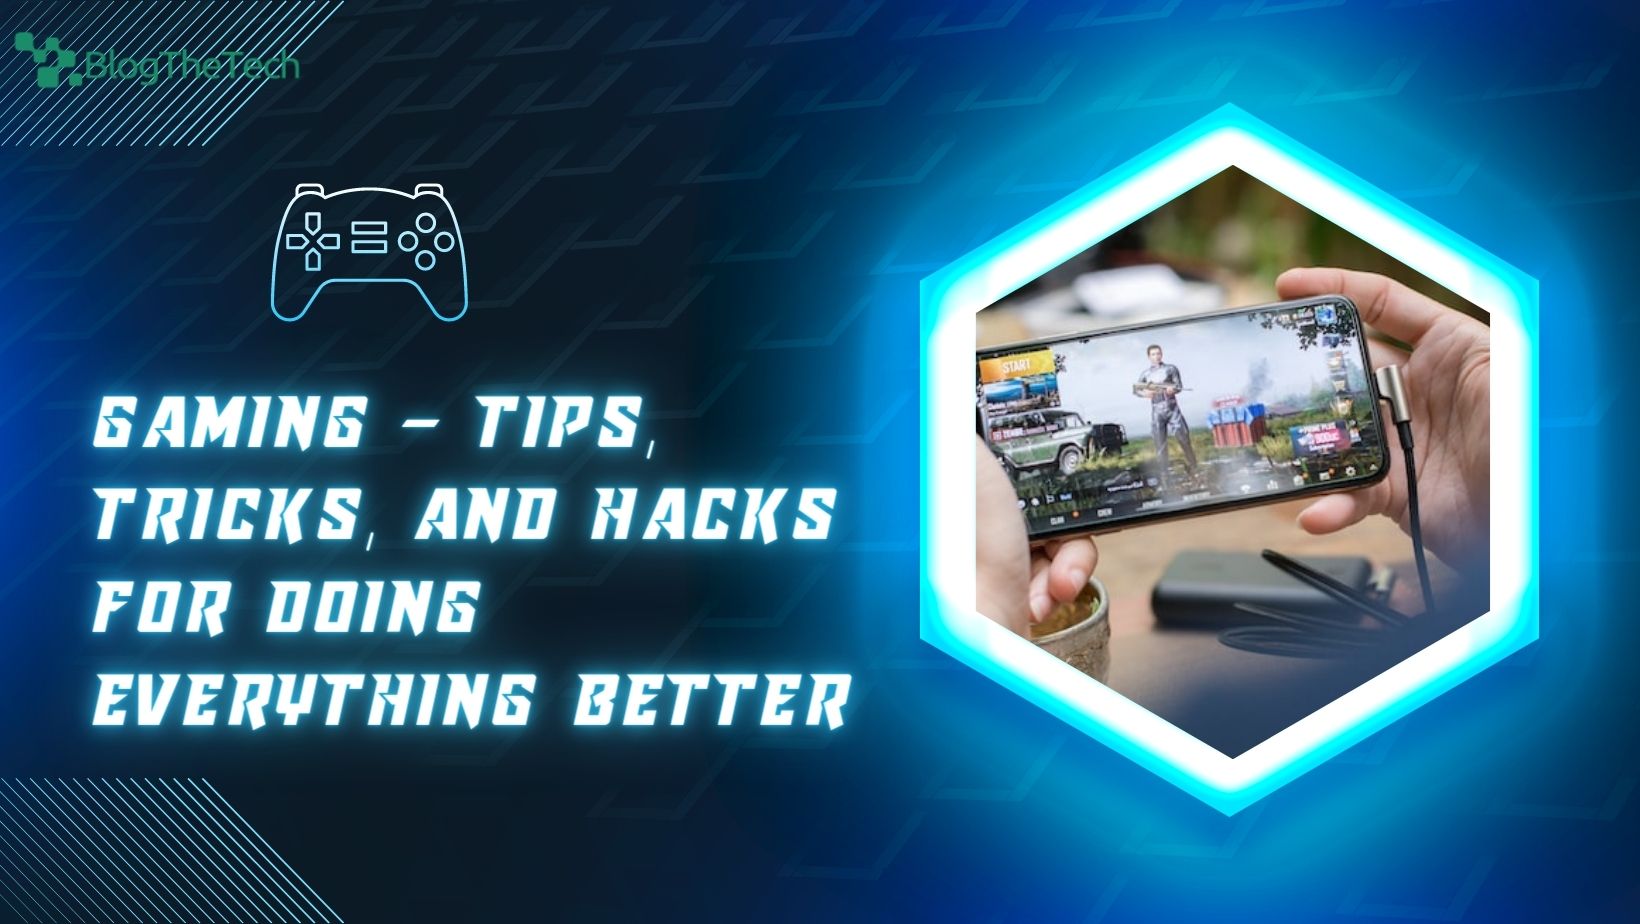 Gaming - Tips, Tricks, and Hacks for Doing Everything Better